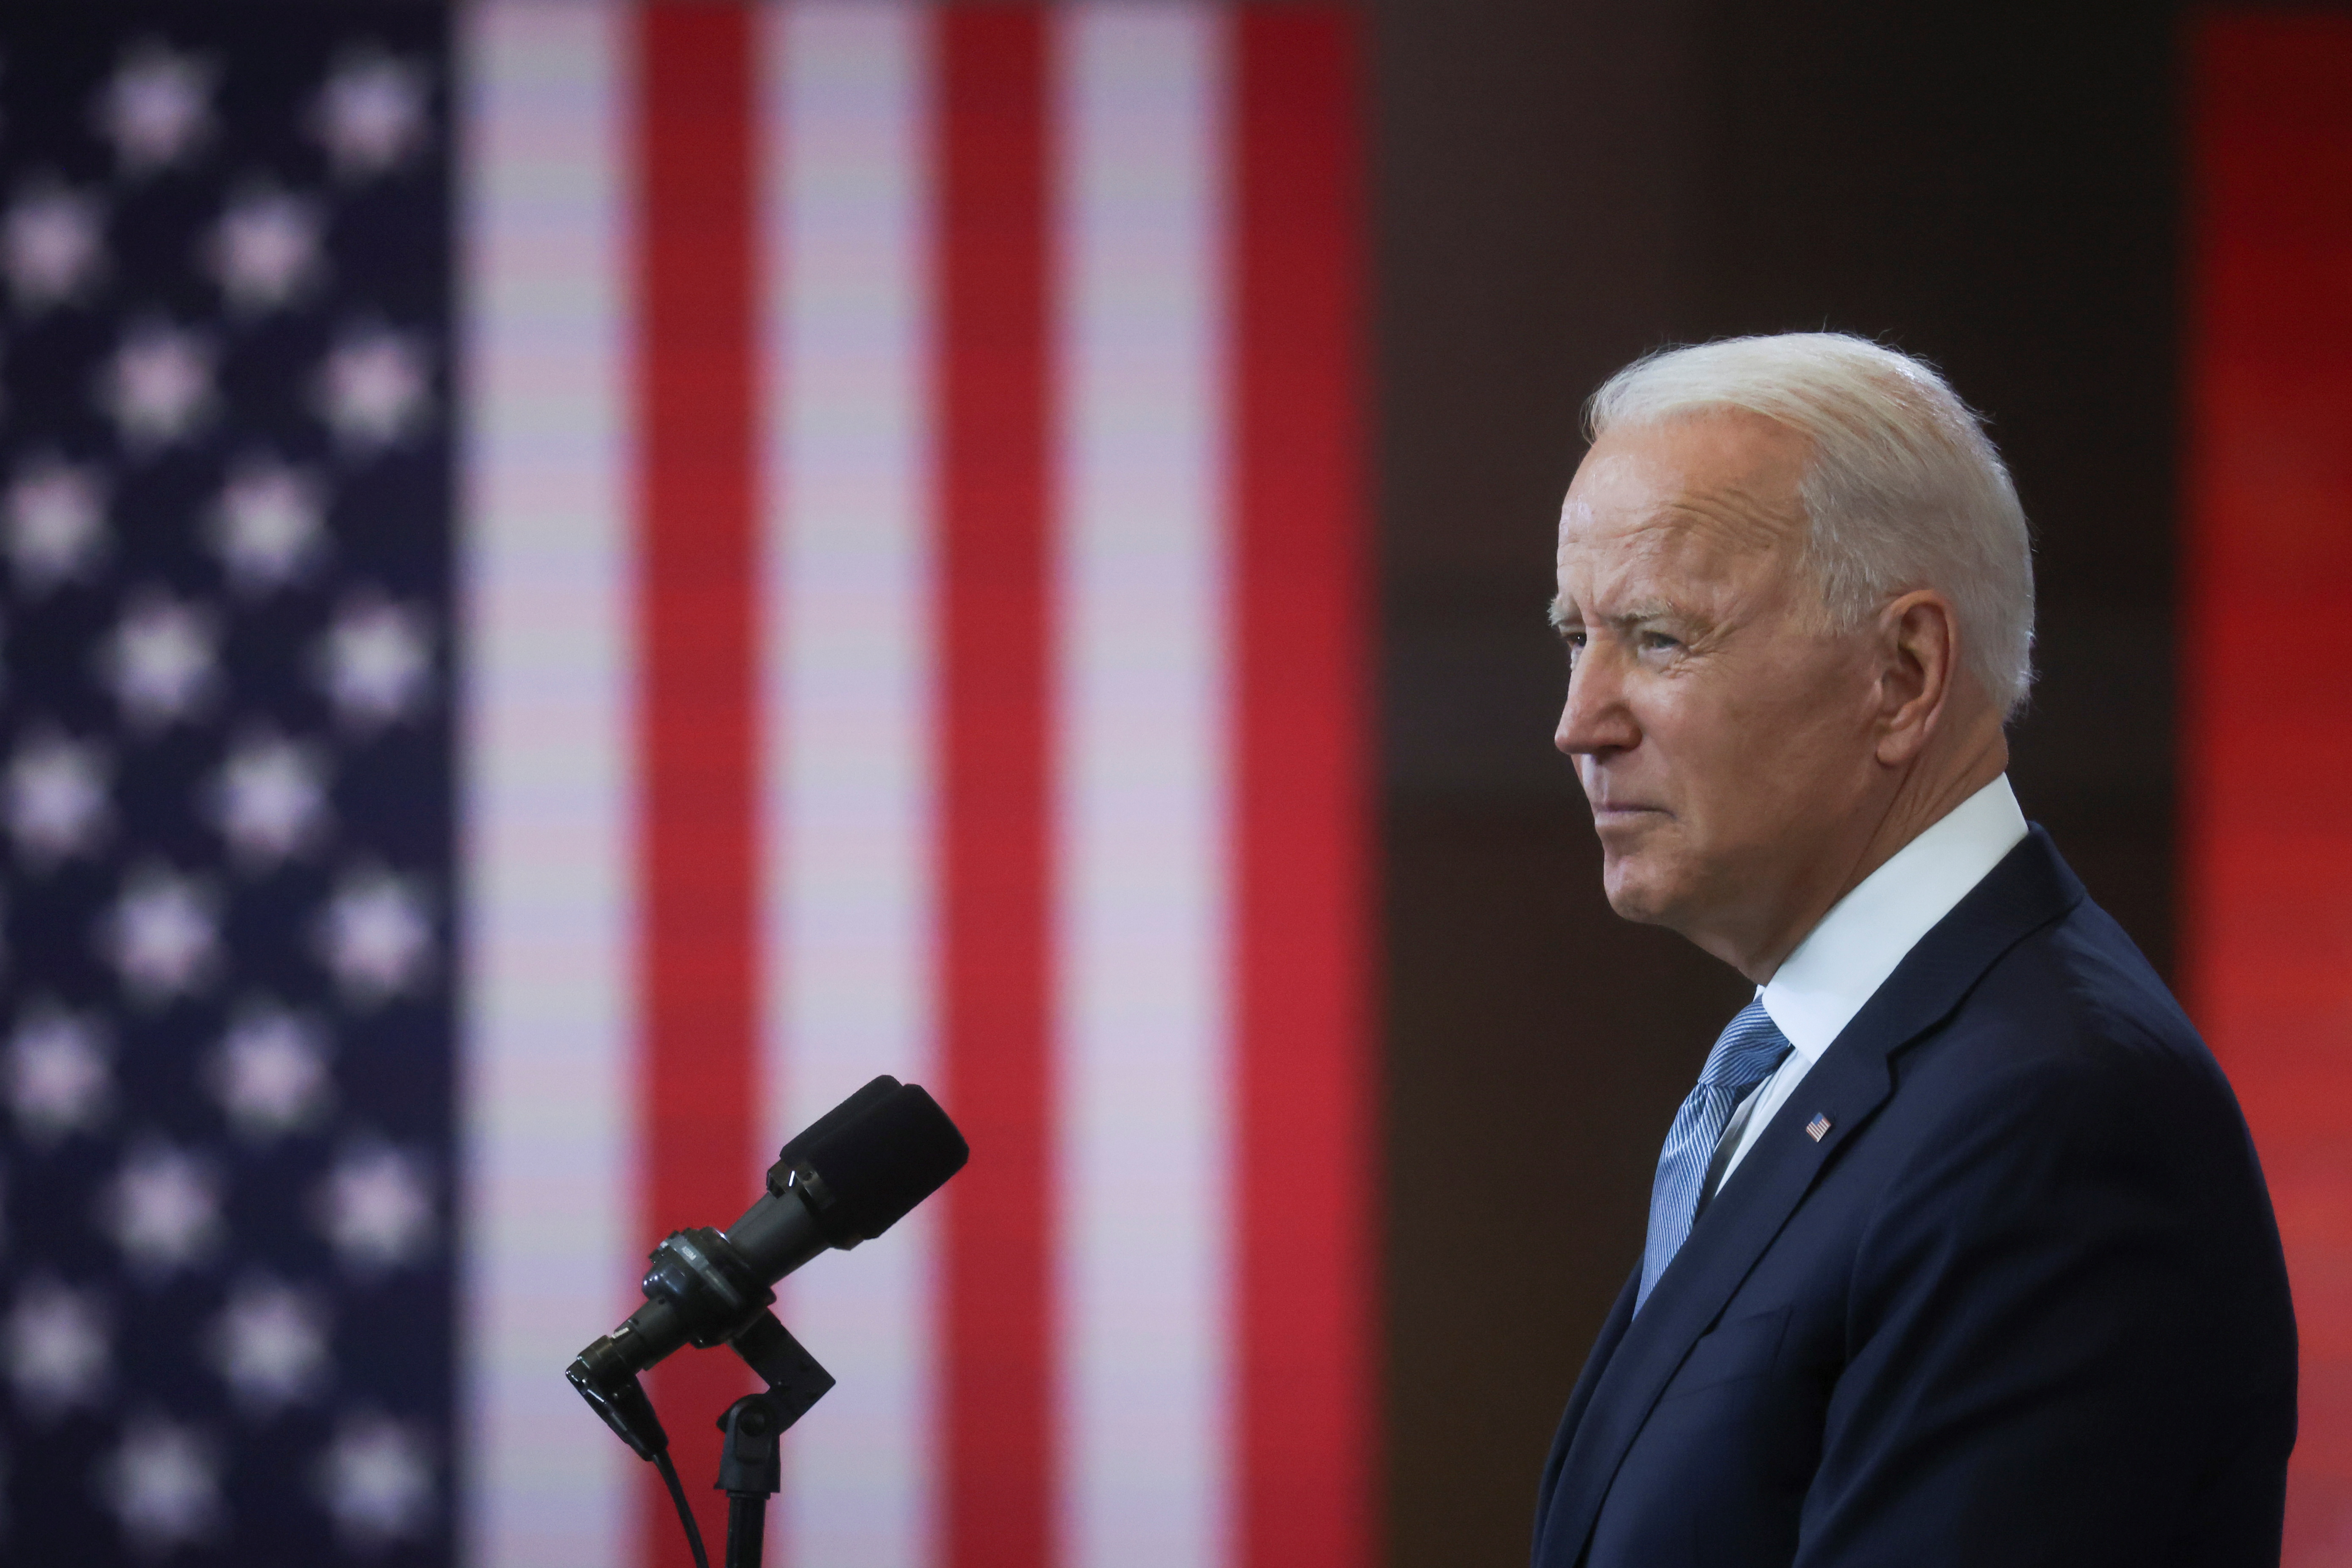 U.S. President Joe Biden delivers remarks on actions to protect voting rights in a speech in Philadelphia